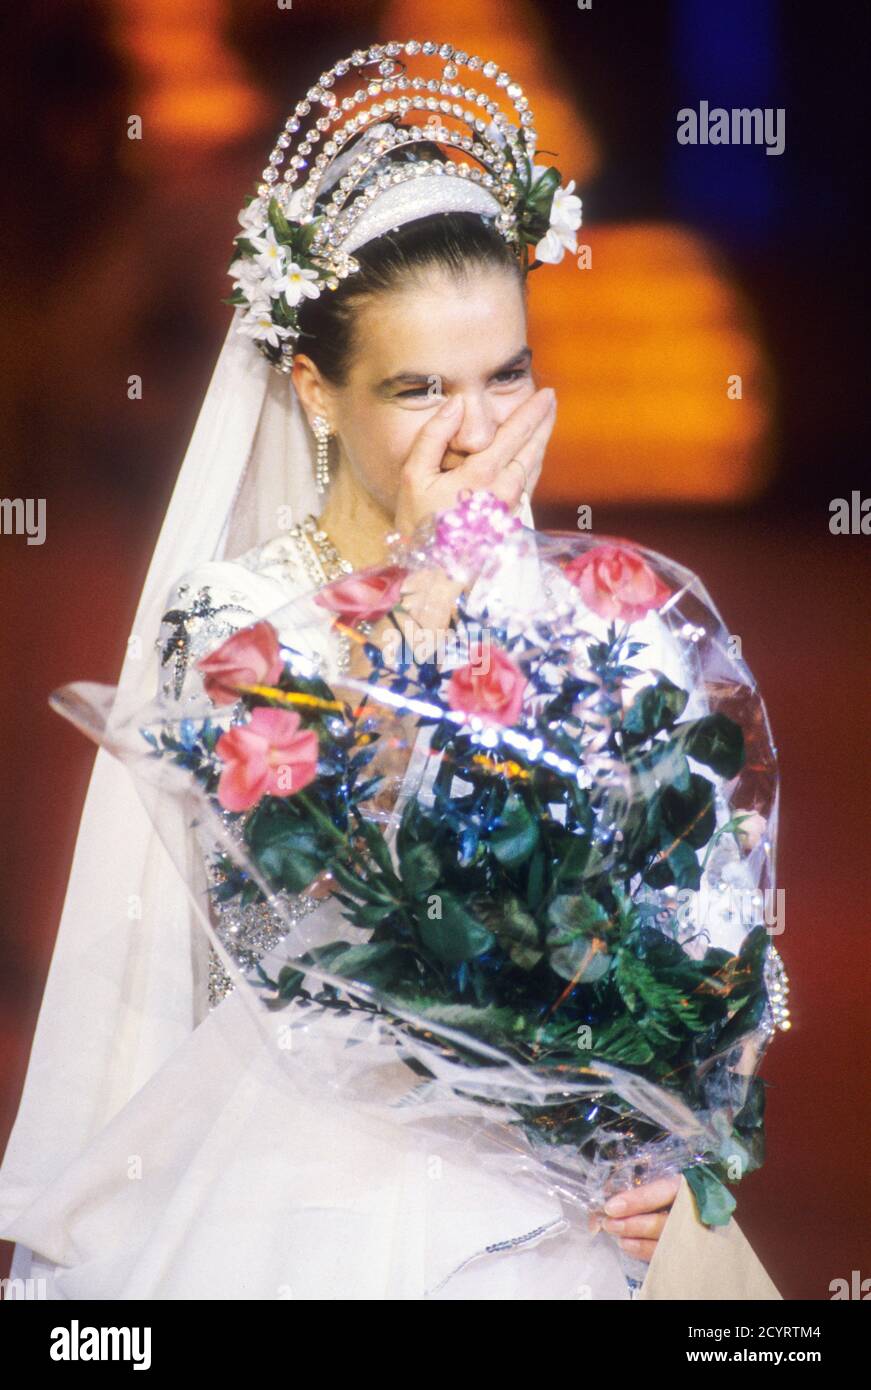 KATARINA (Kati) WITT (GDR) - world champion and gold medal winner Kati Witt (Gold 1988 in Calgary). Flowers after the GDR athlete's first appearance in West Germany as the star guest of the Holiday on Ice show on November 24th, 1988 in the Westfalenhalle in Dortmund (show from November 24th to December 4th, 1988)    ---  KATARINA (Kati) WITT (DDR) - Weltmeisterin und Golmedaillien-Siegerin Kati Witt (Gold 1988 in Calgary). Blumen nach dem ersten Auftritt der DDR-Sportlerin in der BRD als Stargast der Show Holiday on Ice am 24.11.1988 in der Dortmunter Westfalenhalle (Show vom 24.11.-4.12.1988) Stock Photo